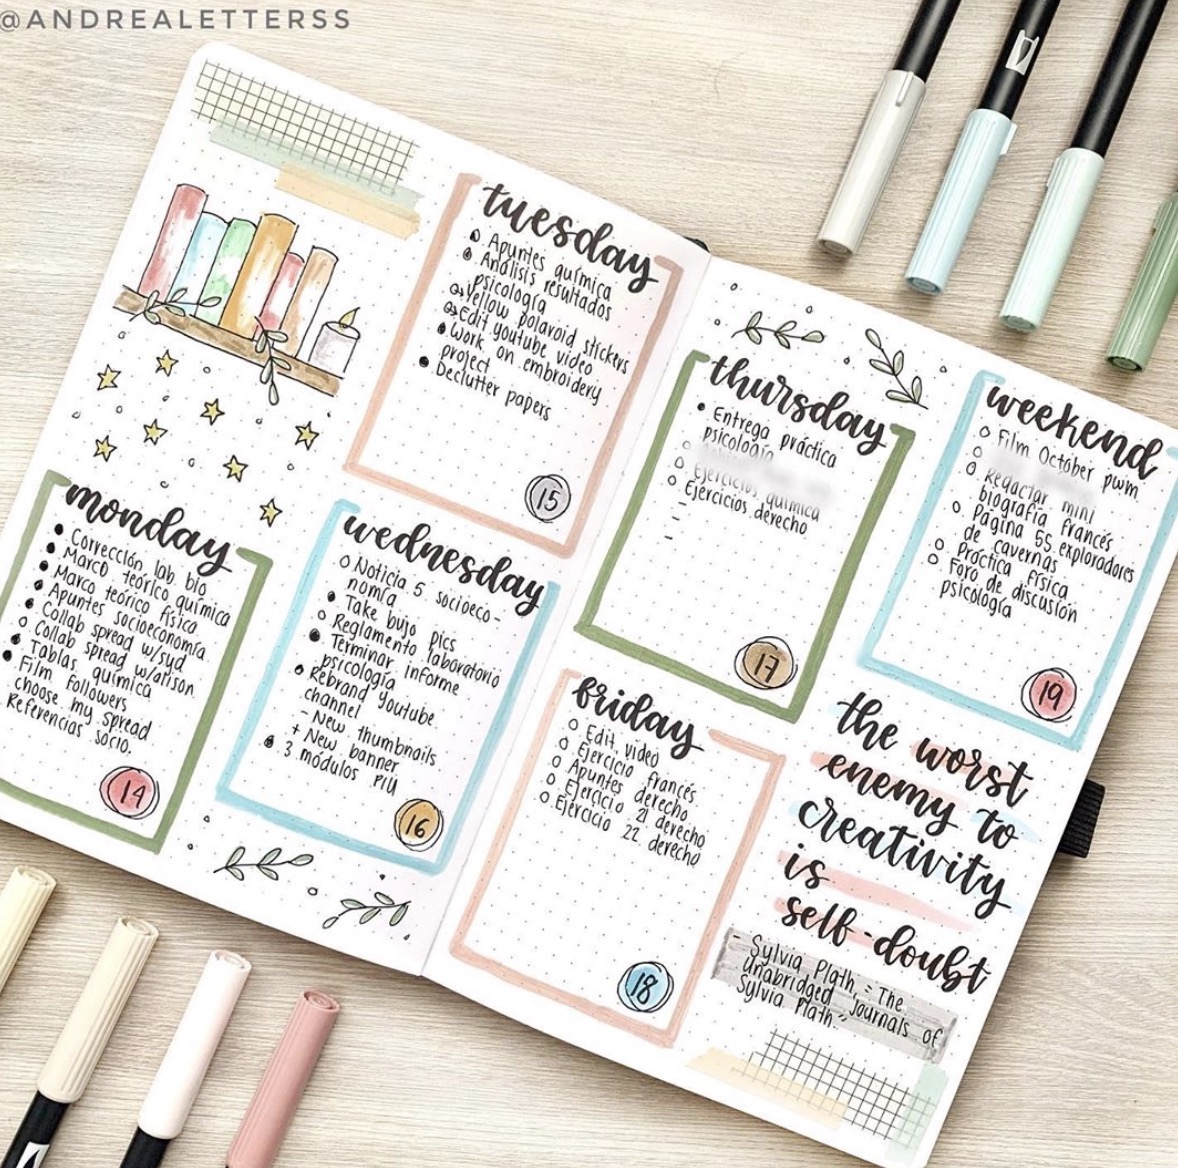 Fall Bullet Journal Layouts that are Better Than the Great Pumpkin